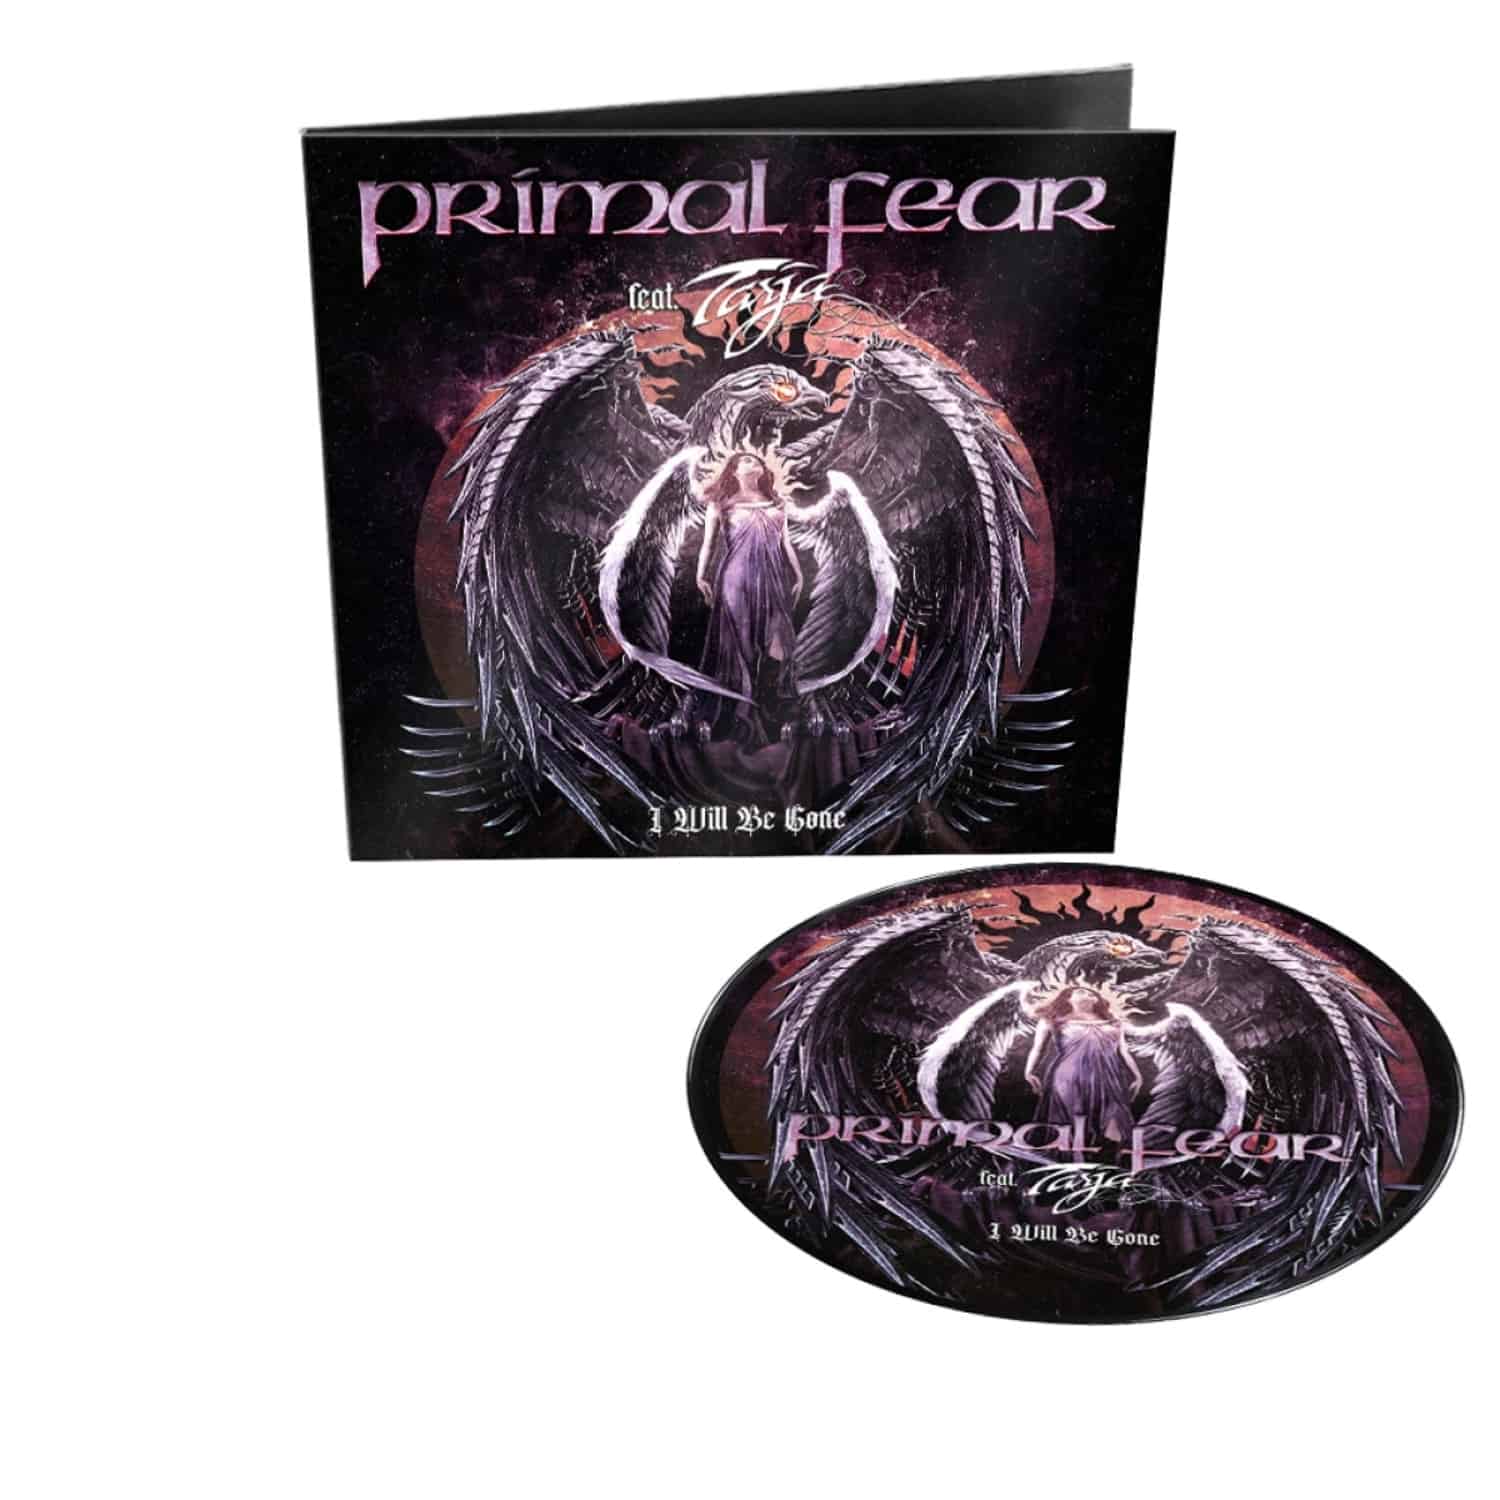 Primal Fear - I WILL BE GONE 